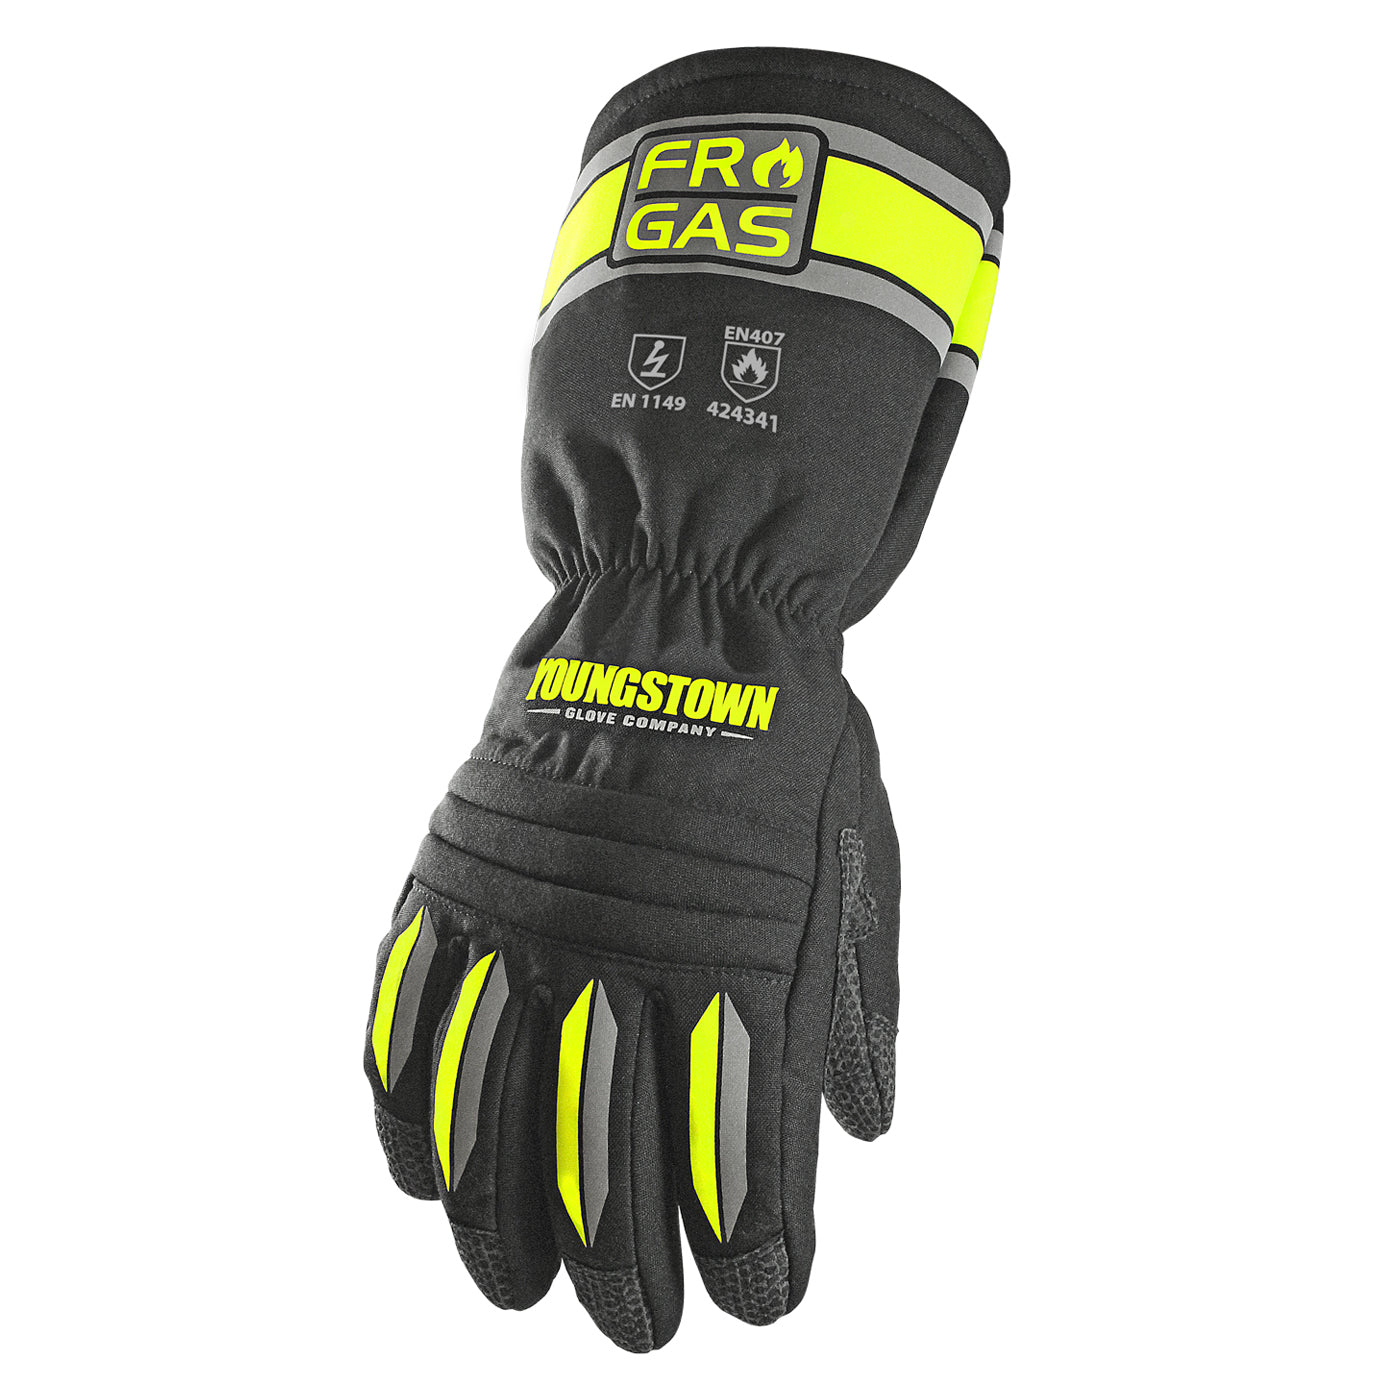 12-3390-60 Youngstown FR Emergency Gas Glove - Main image